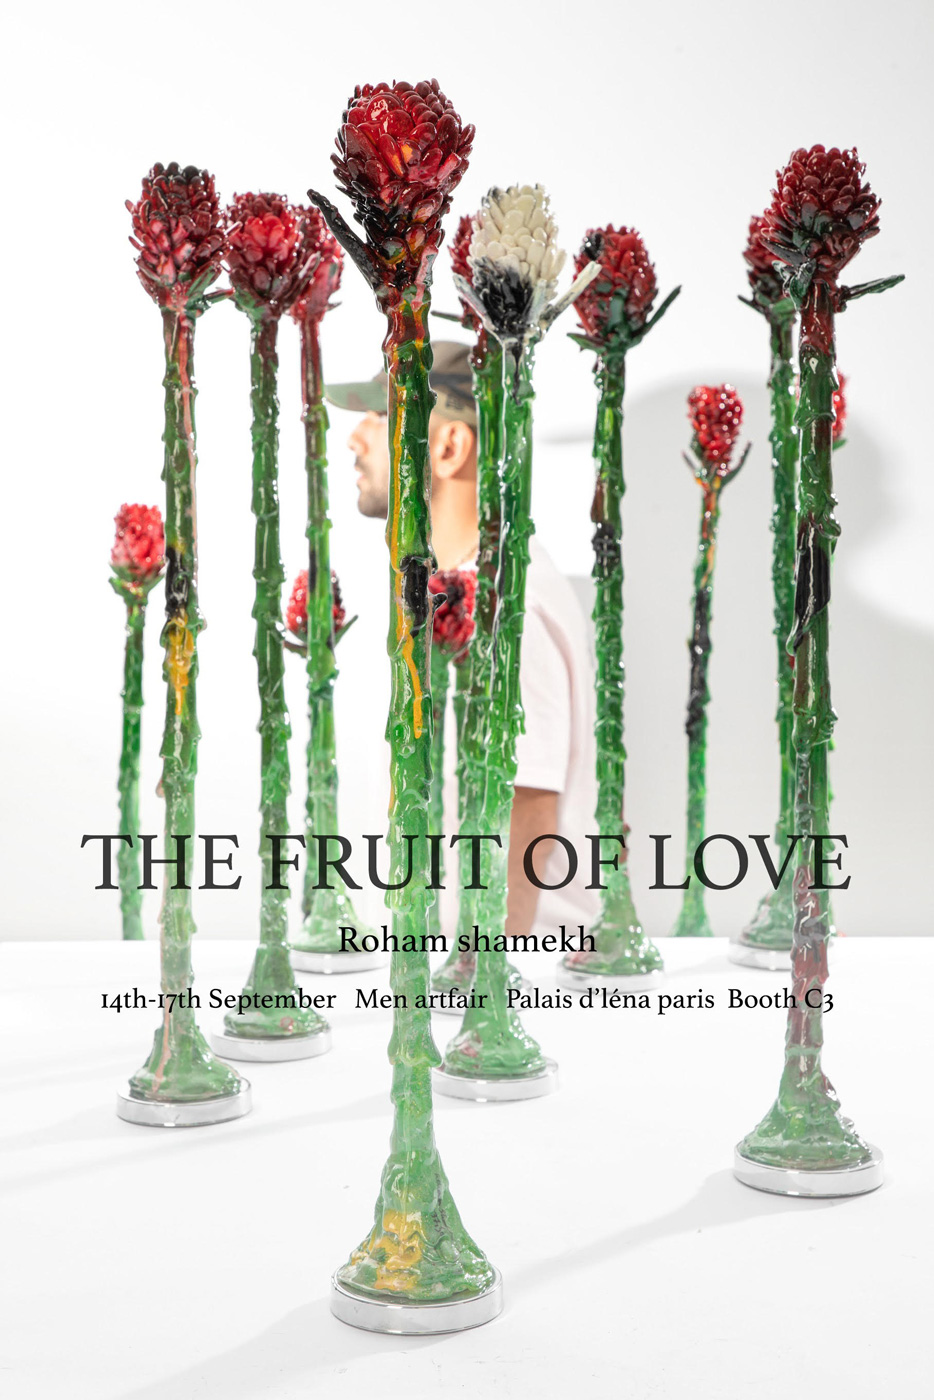 The Fruit of Love “Vase of Humanity”